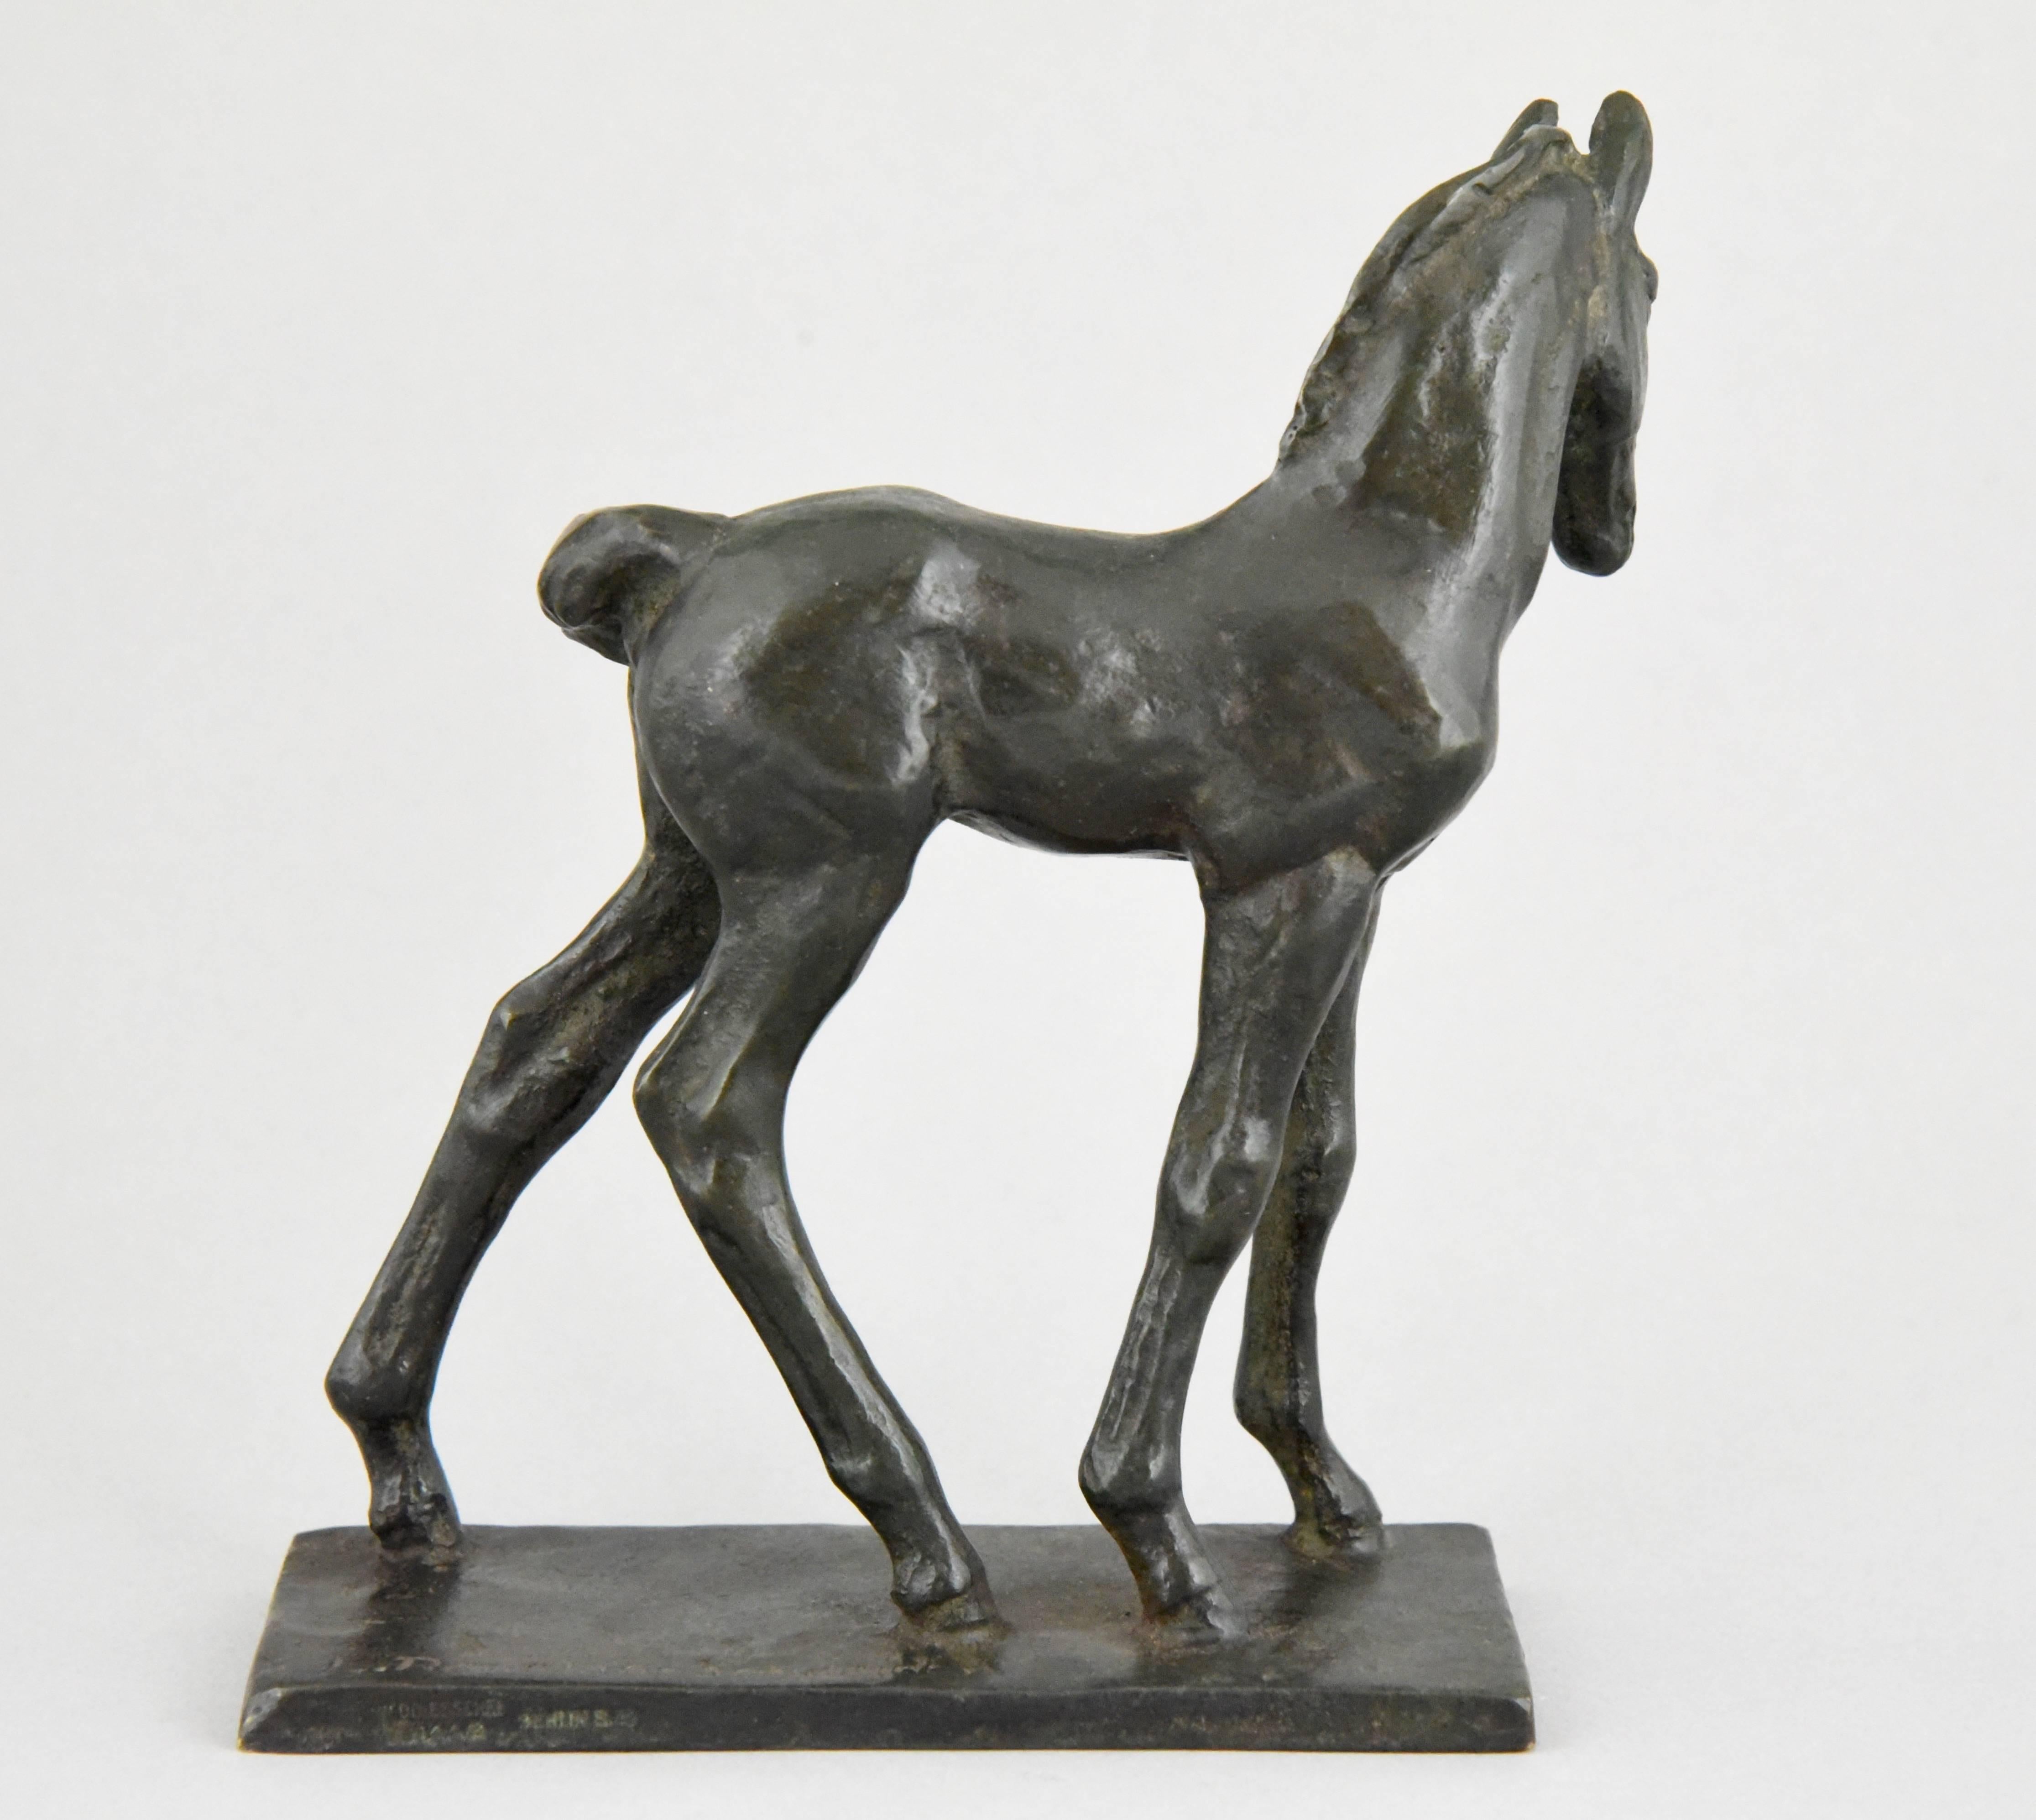 20th Century Art Deco Bronze Sculpture of a Foal, Young Horse by Leonore Rendlen Schneider